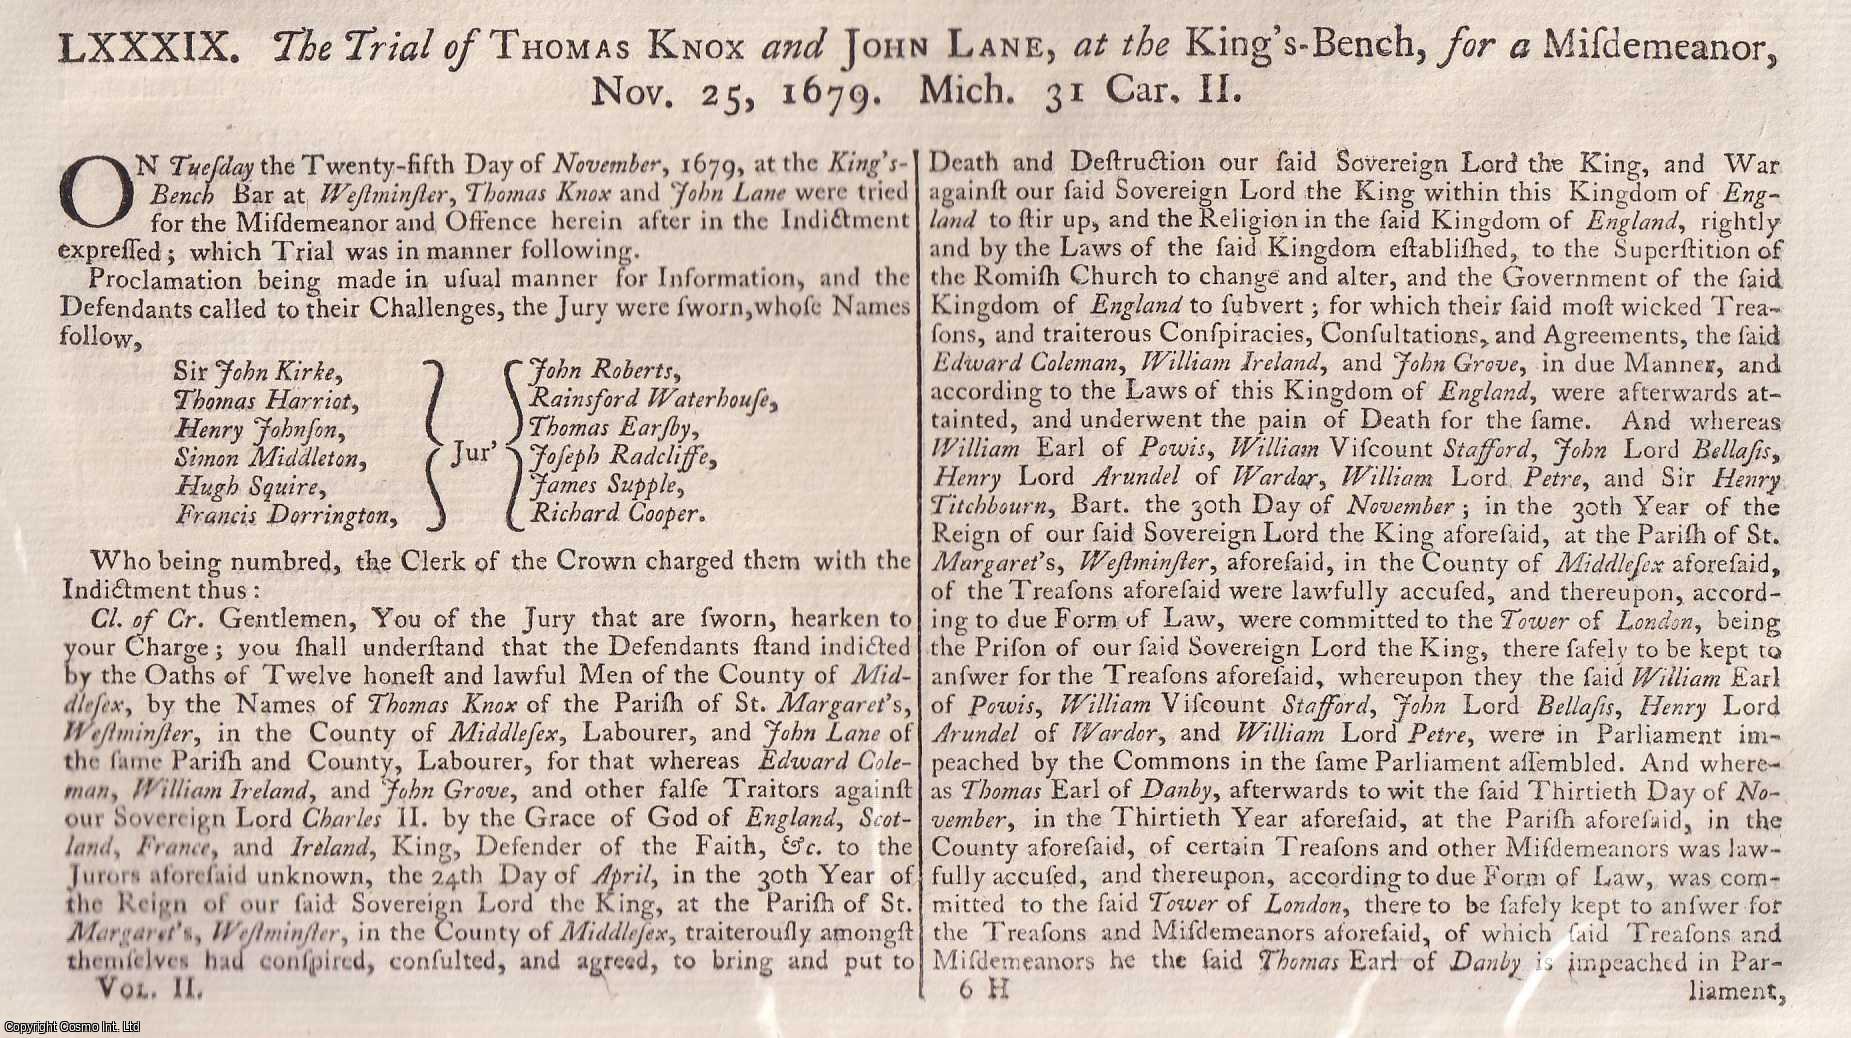 [Trial] - The Trial of Thomas Knox and John Lane, at the King's Bench, for a Misdemeanor, November 25, 1679. An original article from the Collected State Trials.